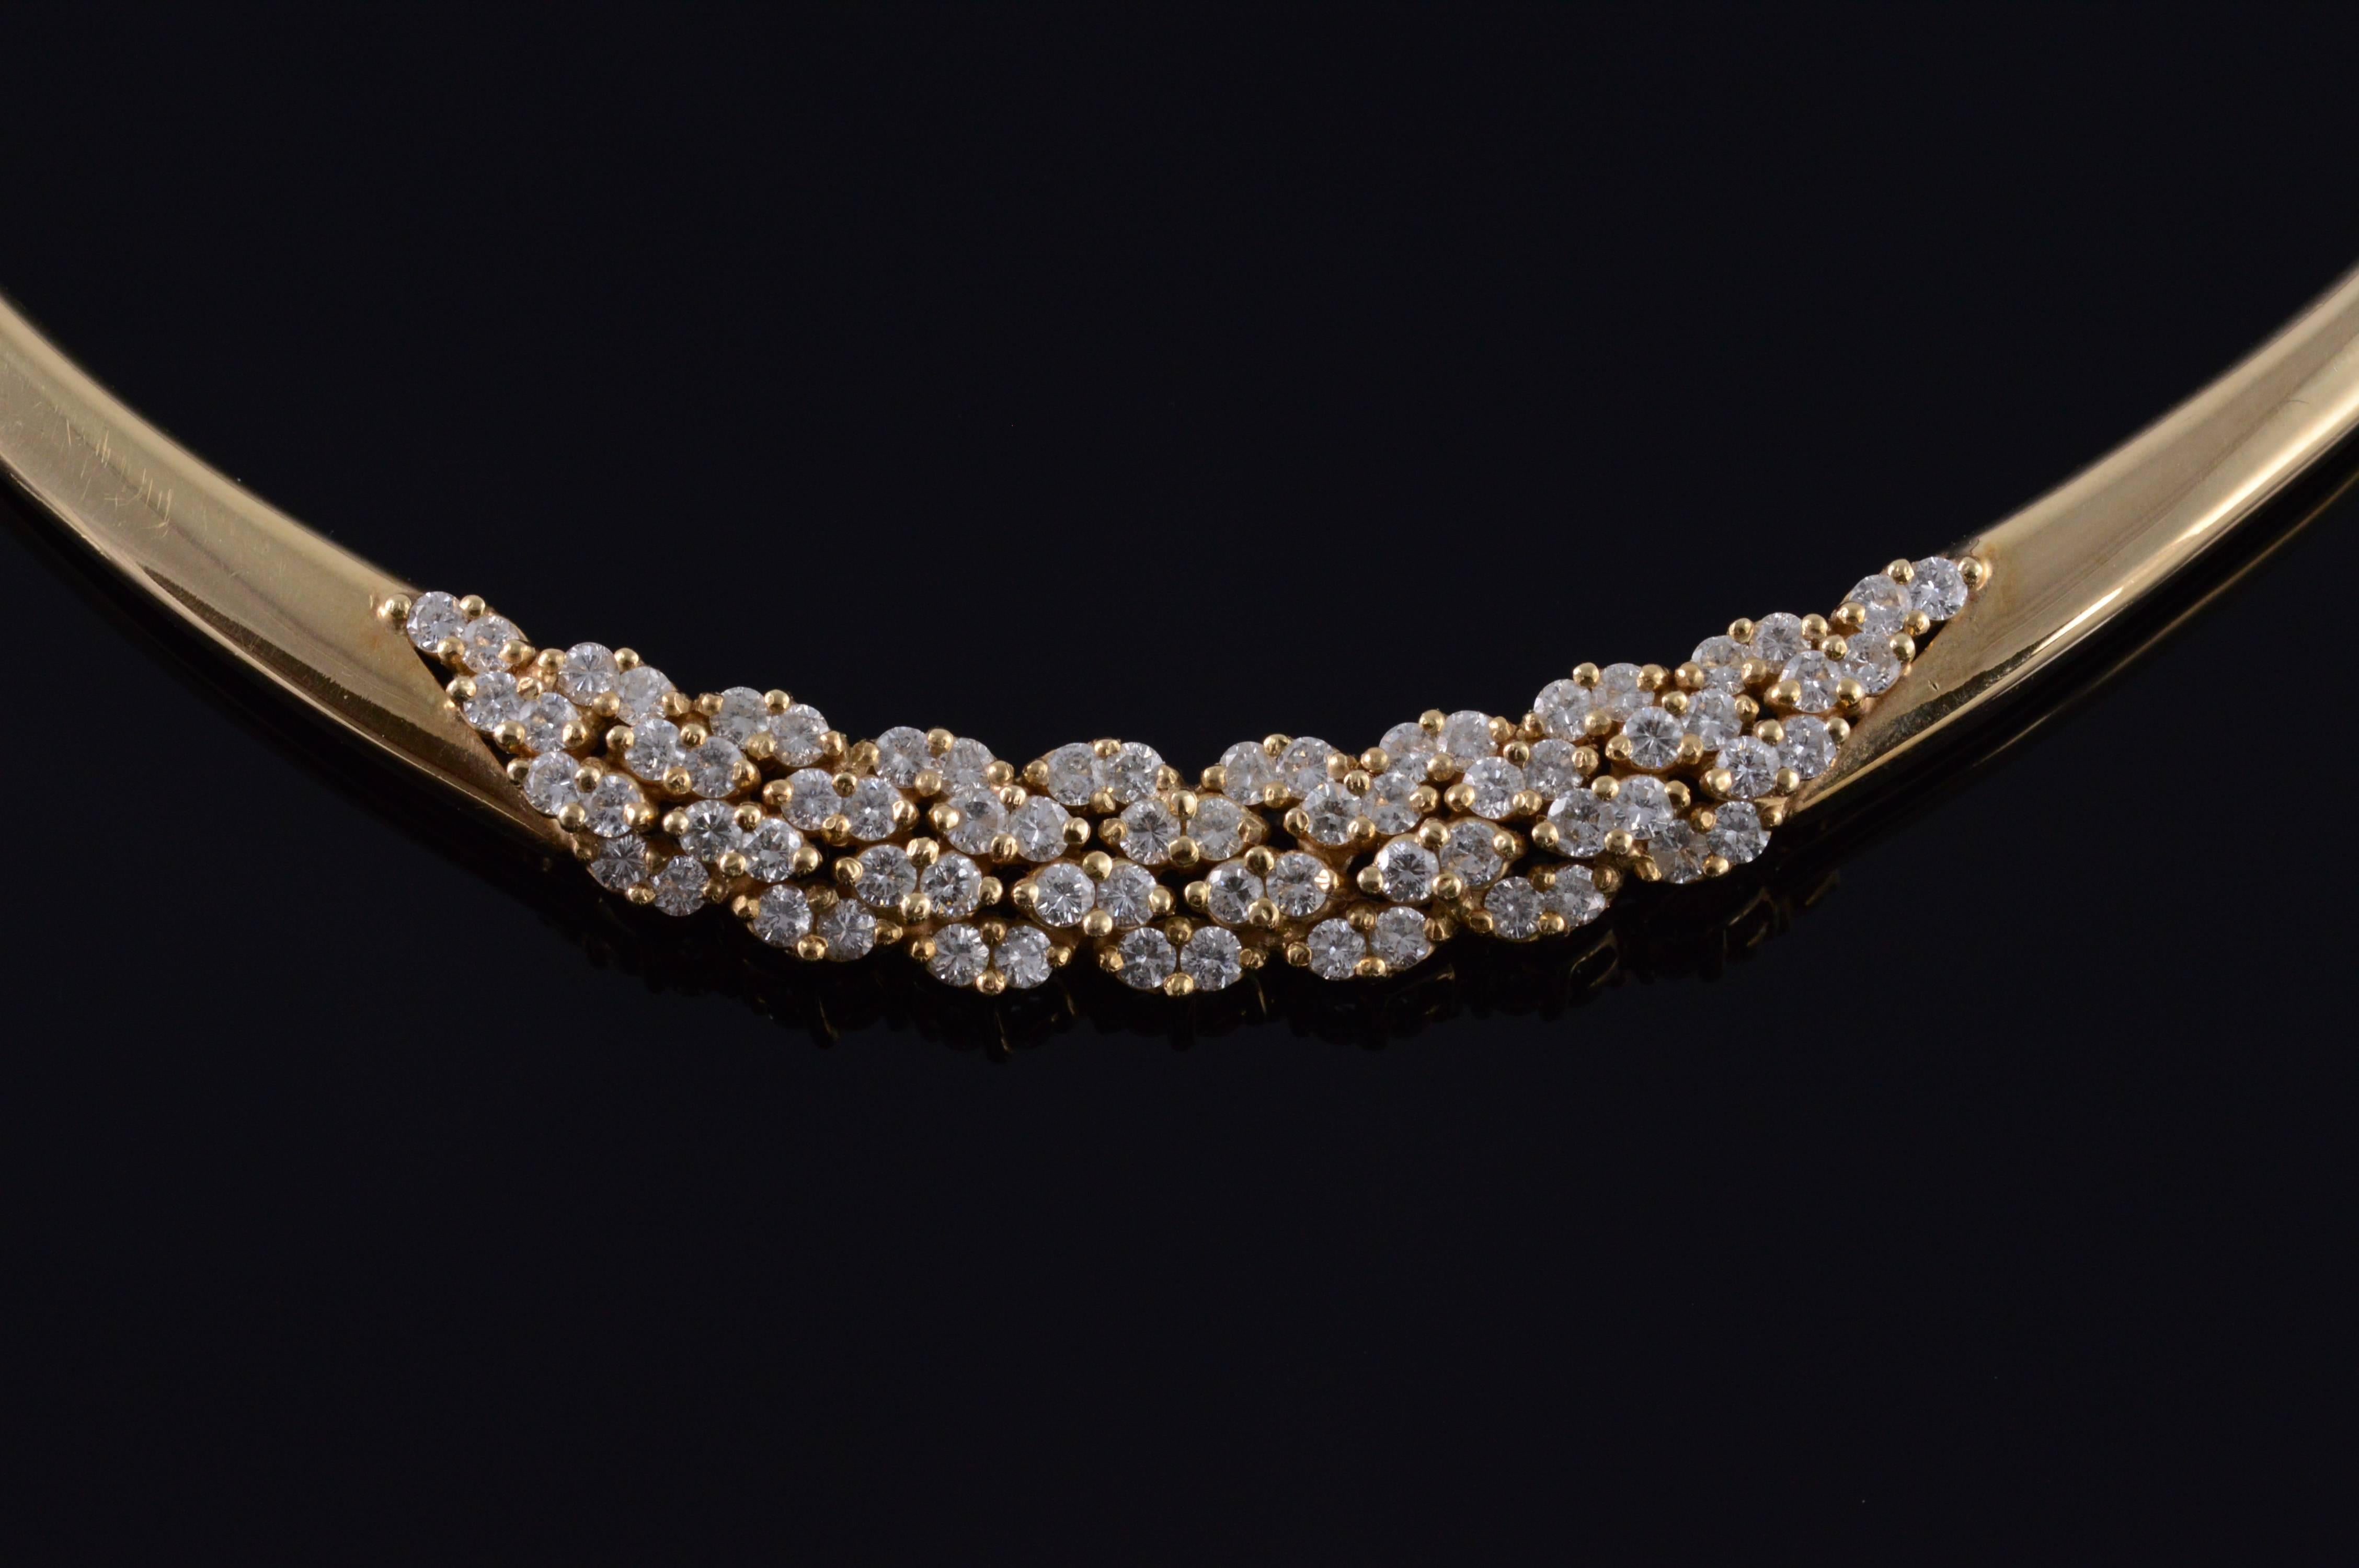 2.04 Ctw Diamond Omega Link 16.25" Heavy Choker Necklace. Diamonds are SI clarity G-H color. A well made omega choker! 